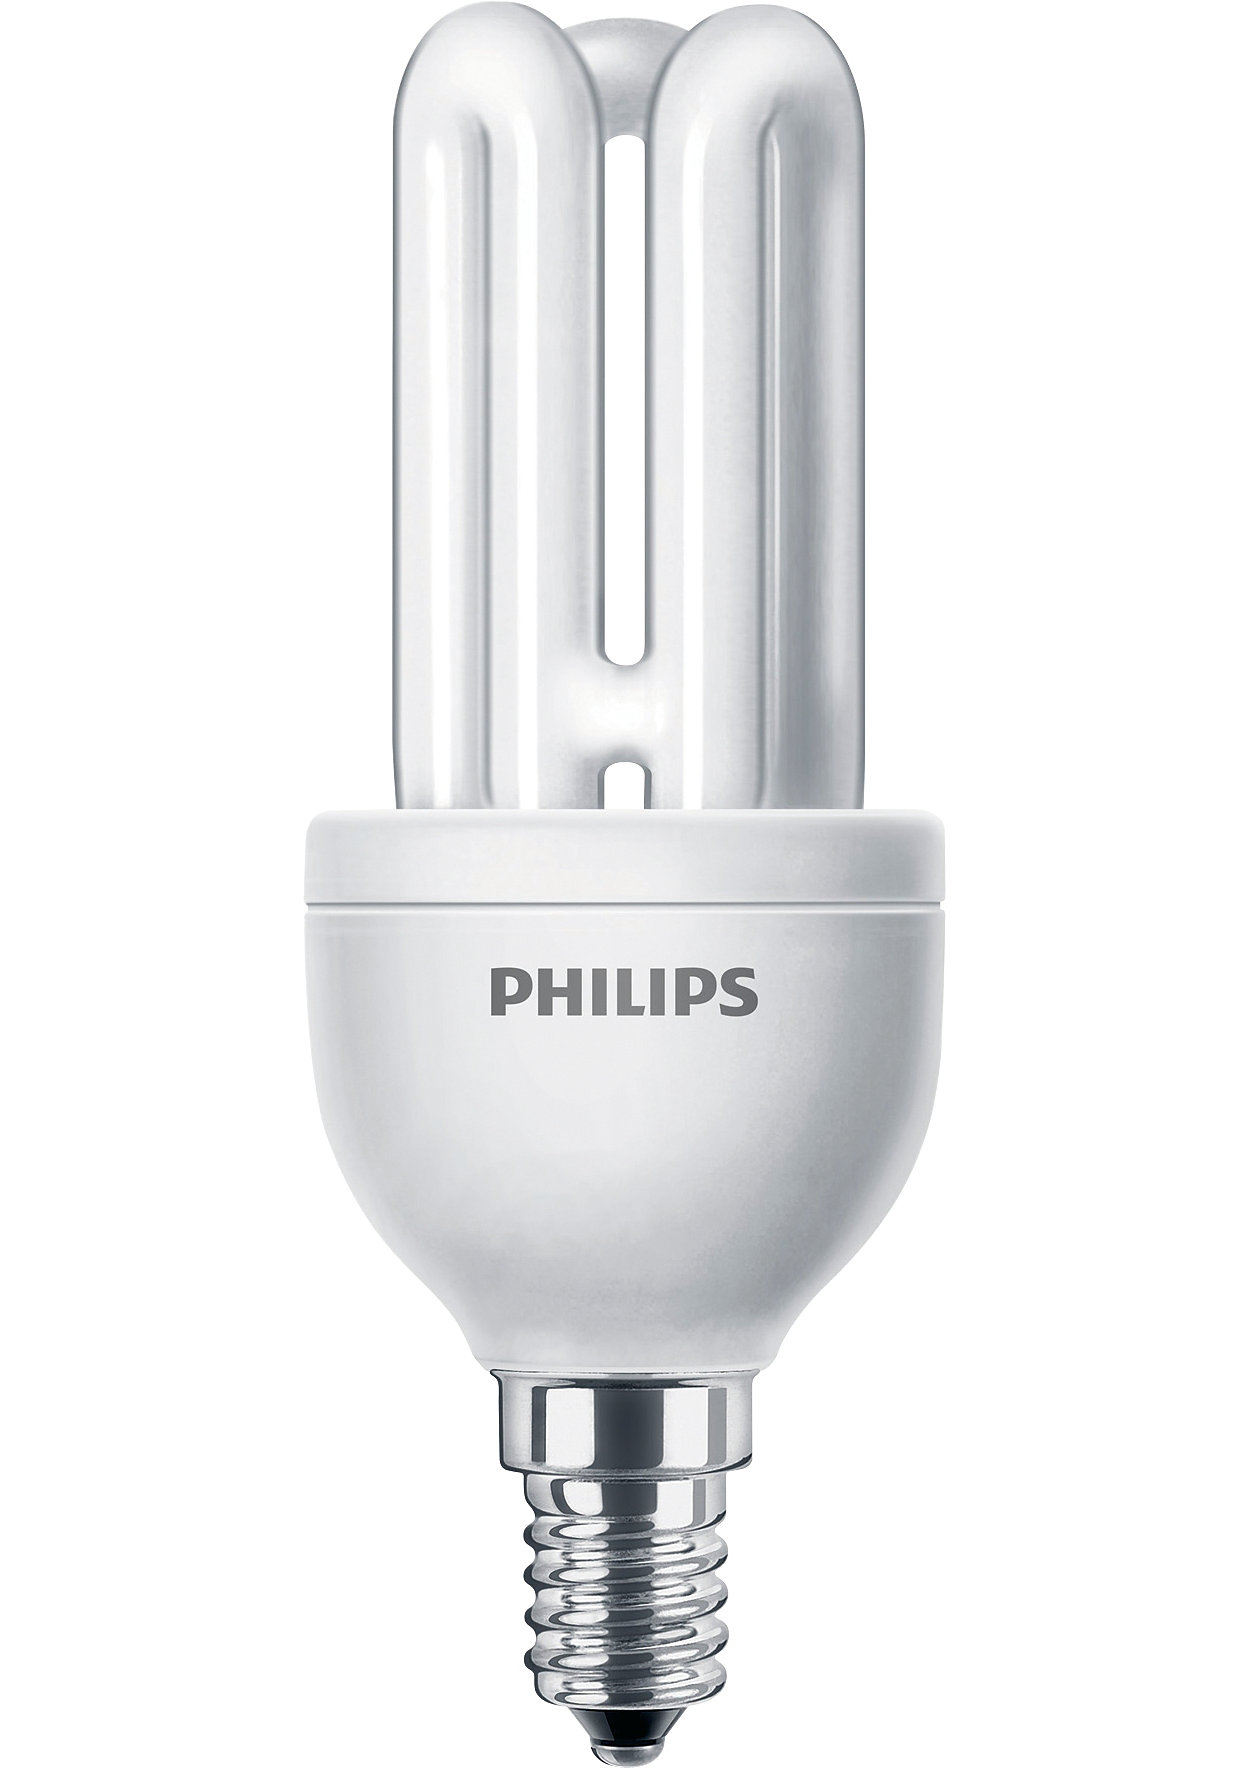 Small and powerful energy saver gives high quality light, with compact design